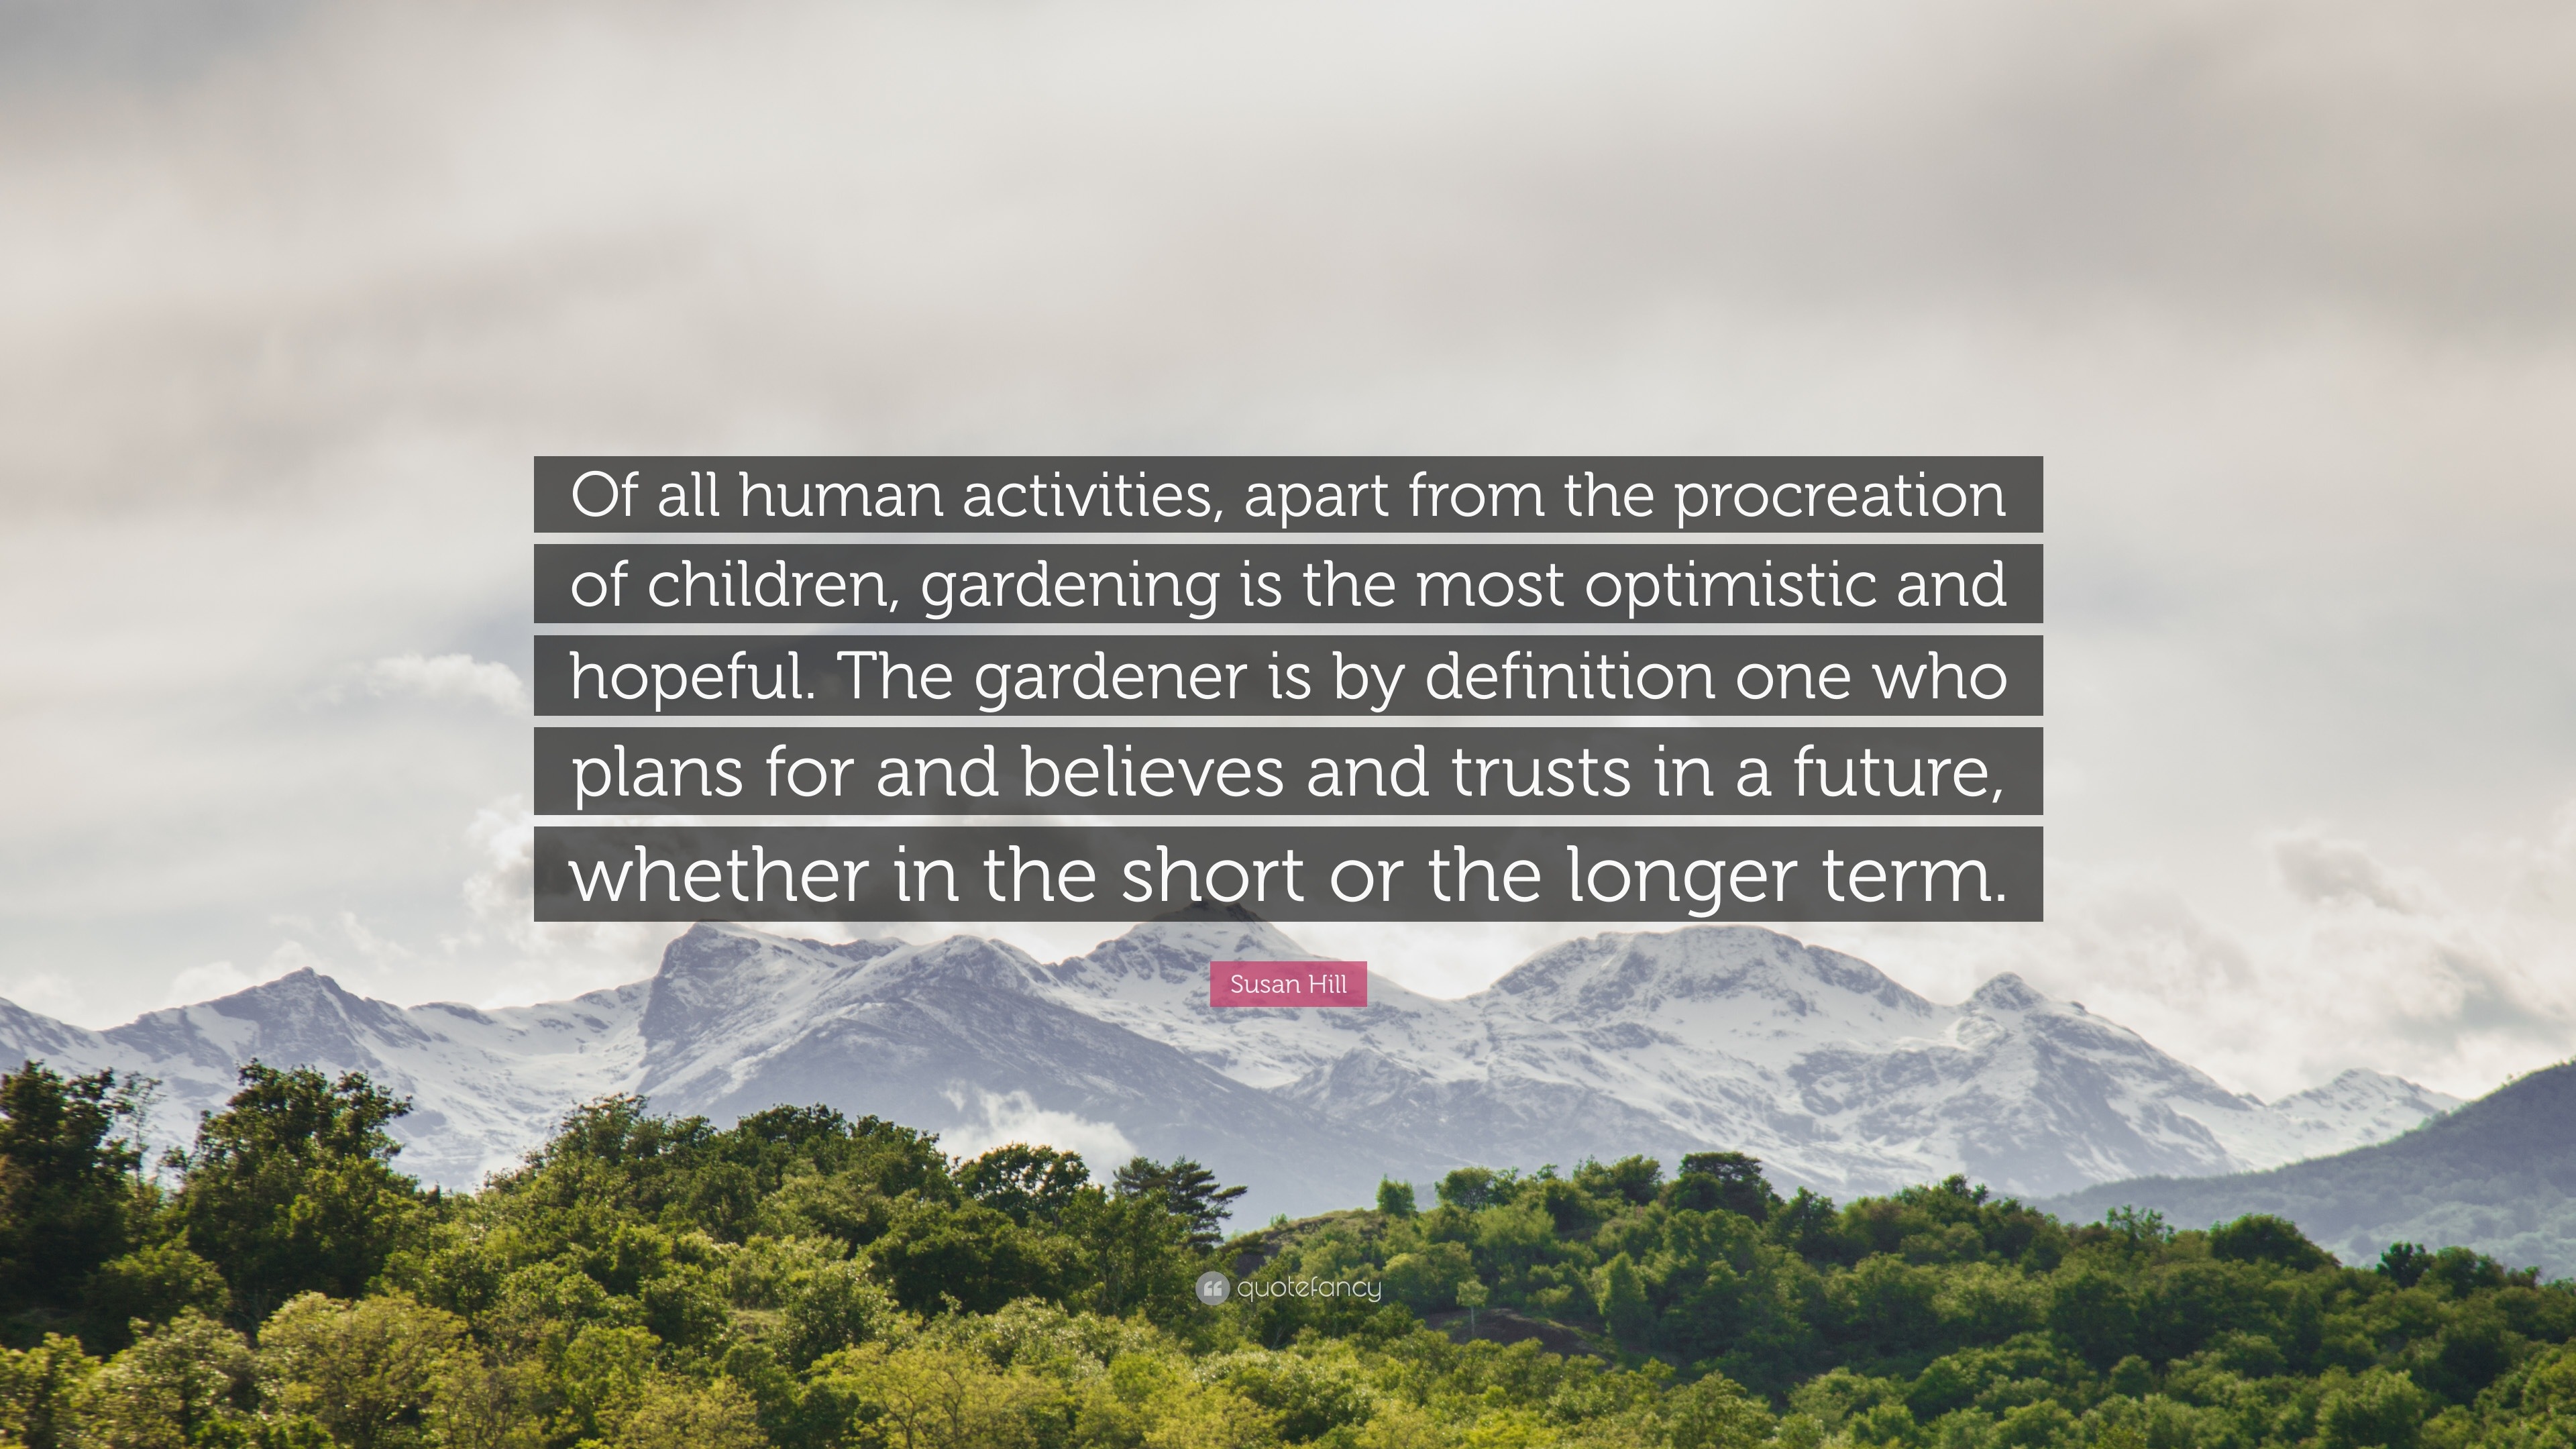 Susan Hill Quote: “Of all human activities, apart from the procreation of  children, gardening is the most optimistic and hopeful. The garde”